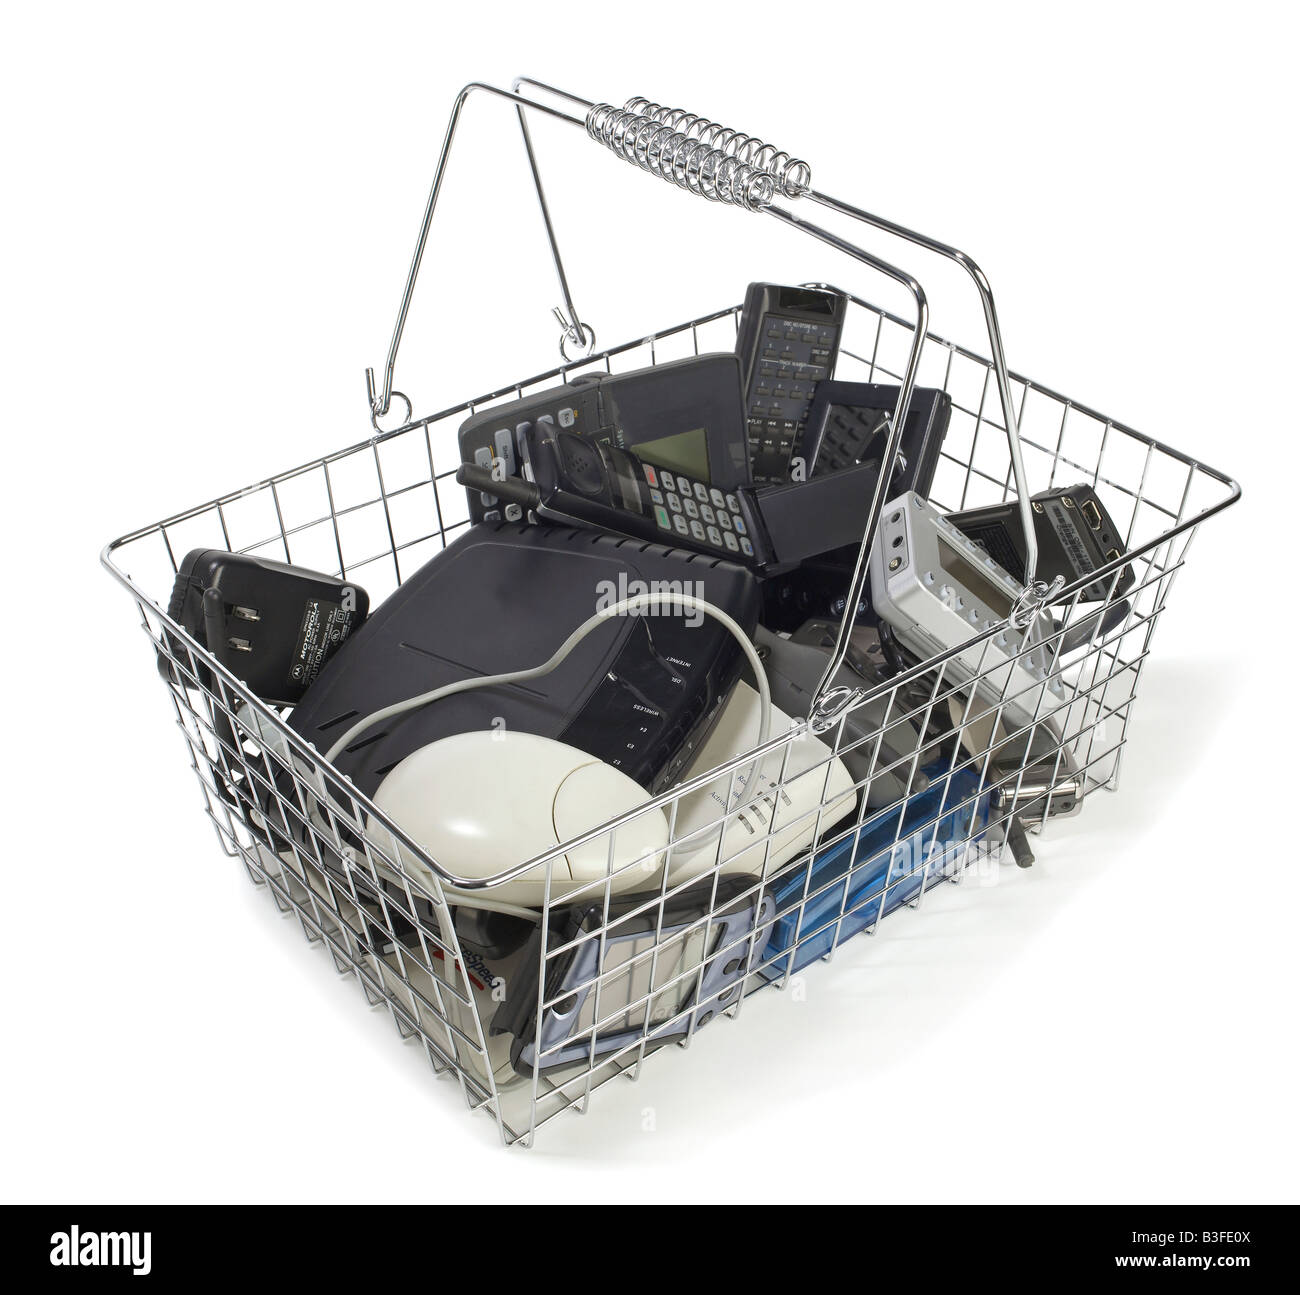 Shopping basket with old tech gadgets Stock Photo